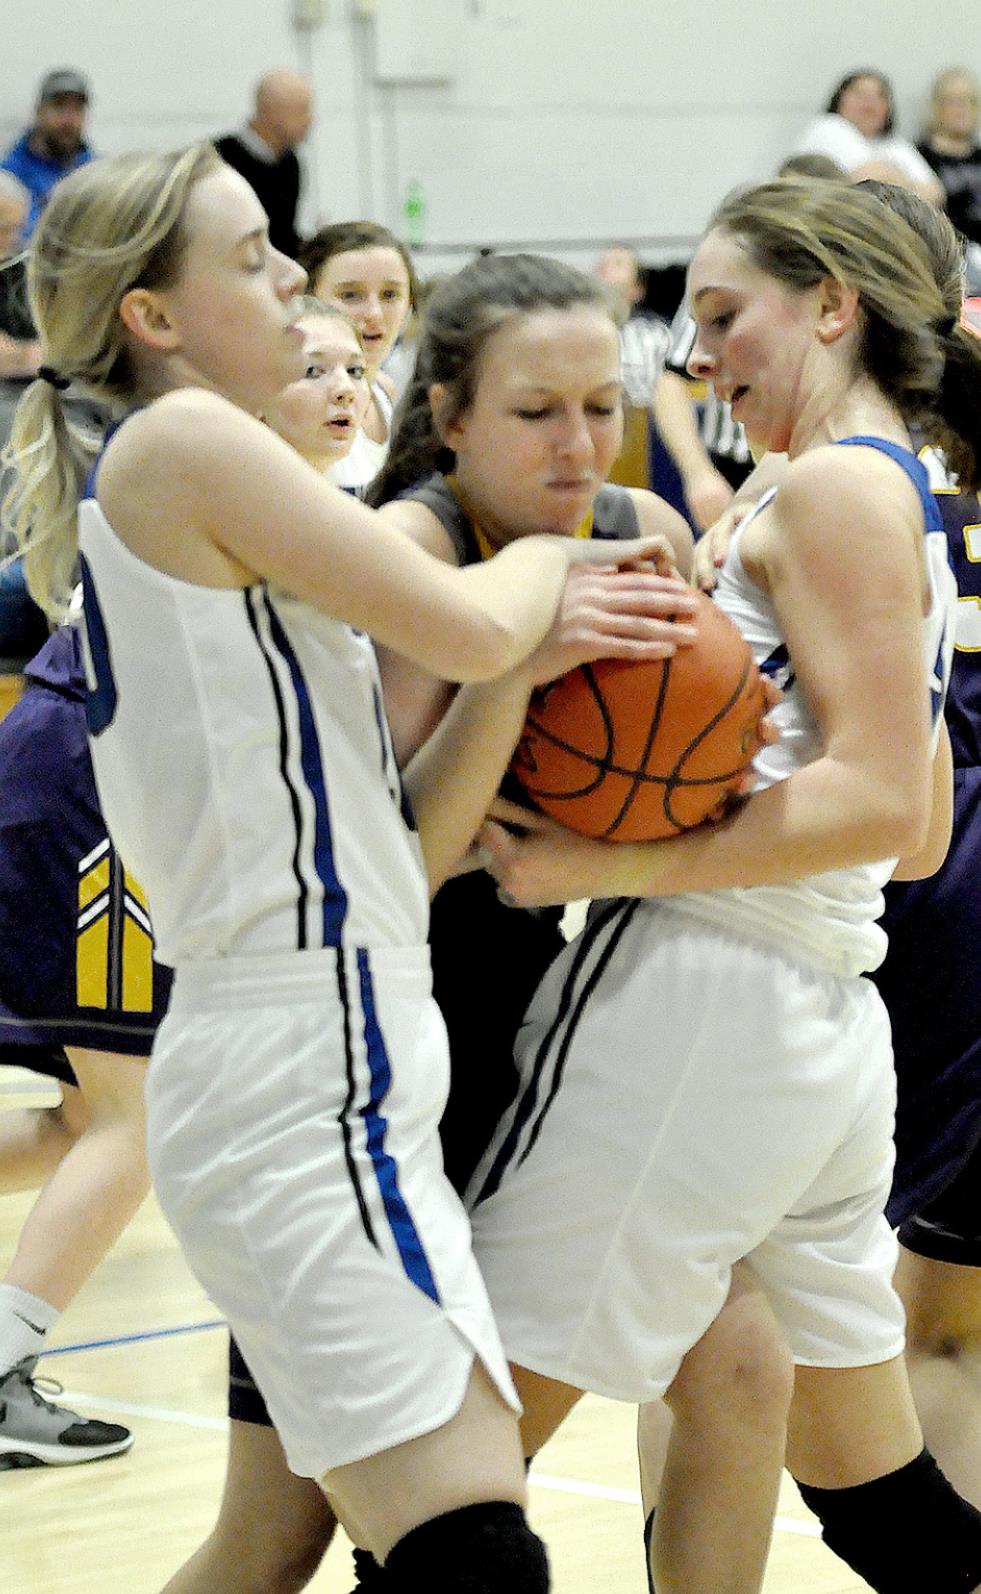 ELLIE BELLERIVE (left) and Olivia Dix (right) tie up their Trego Lady Eagle opponent during action last Tuesday at Tiger Gymnasium.